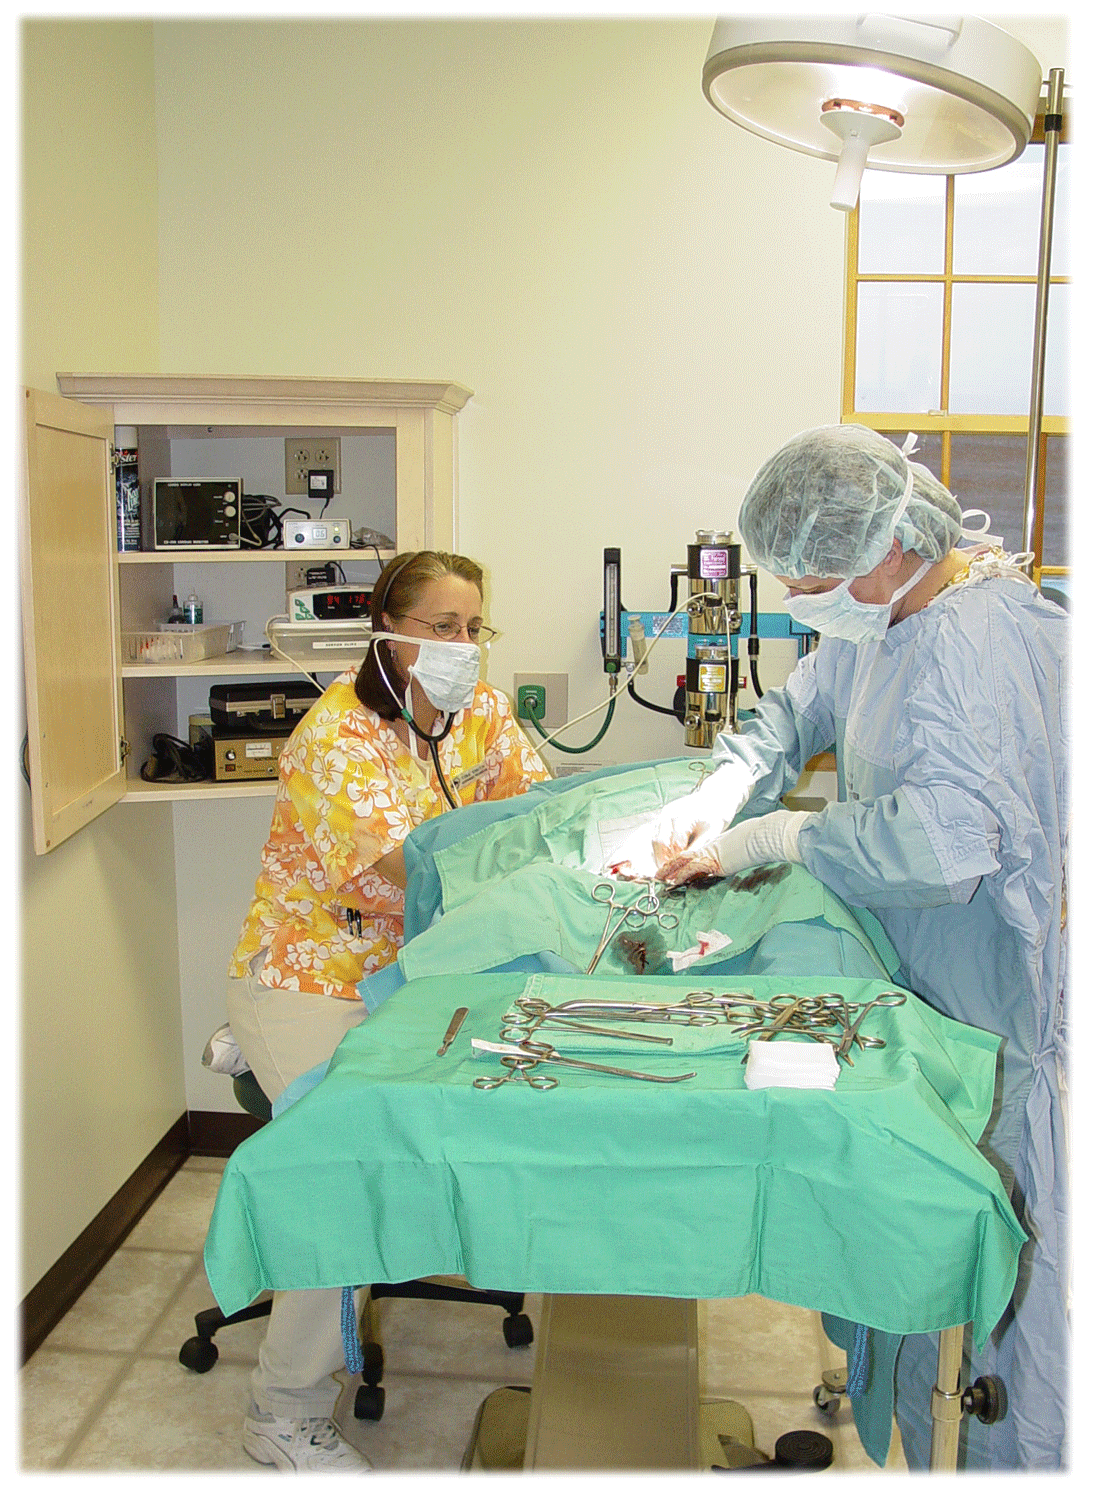 A doctor performing surgery while a technician monitors anesthesia